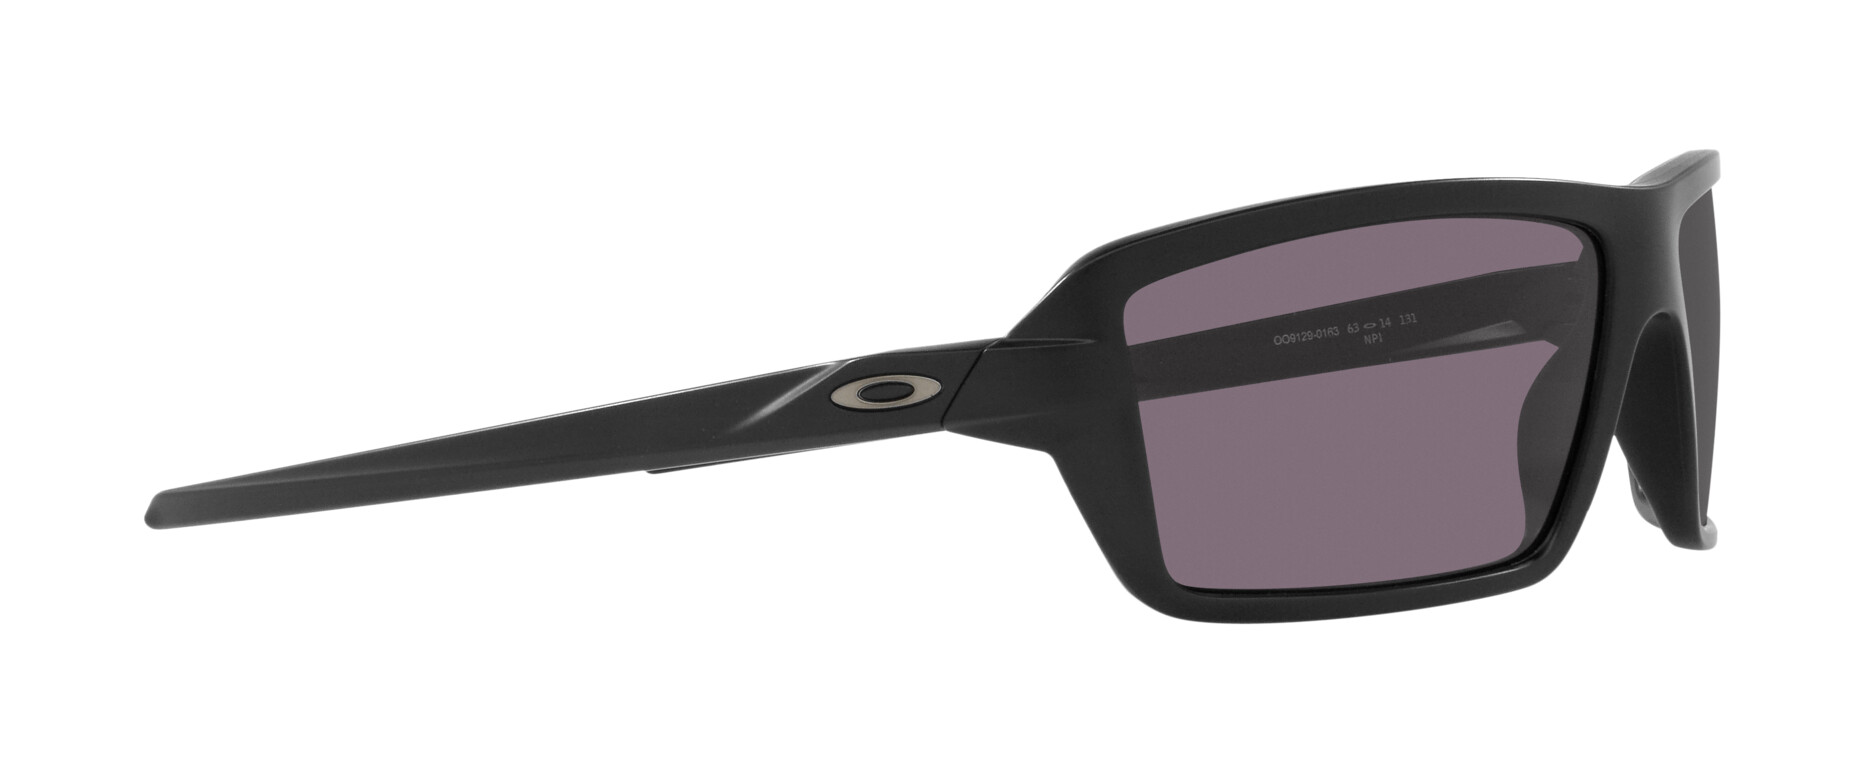 [products.image.promotional03] Oakley CABLES 0OO9129 912901 Sonnenbrille